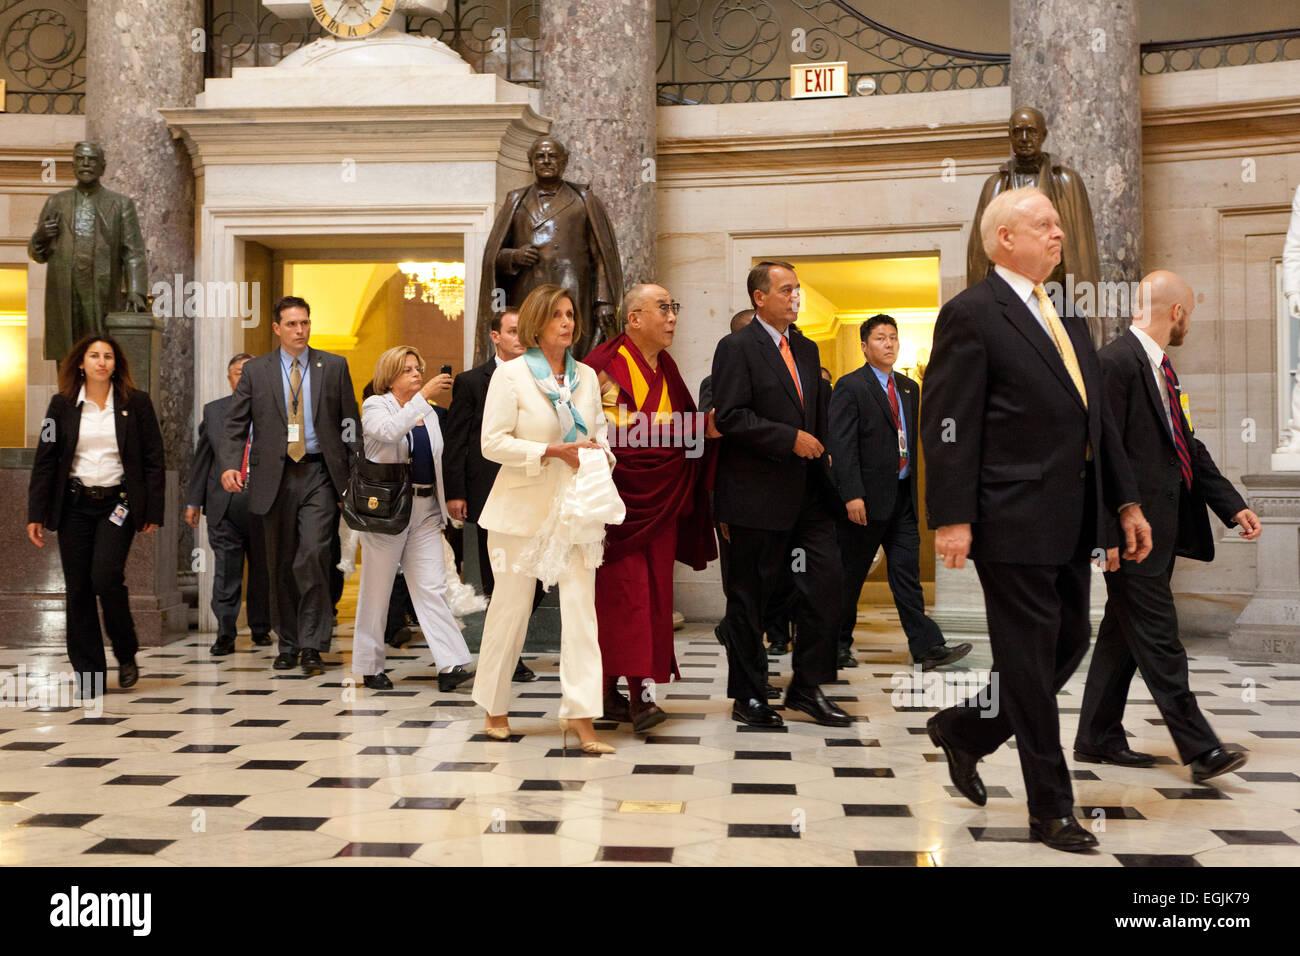 US Speaker of the House John Boehner and Democratic Leader Nancy Pelosi escort the Dalai Lama to a press conference following their meeting on Capitol Hill July 7, 2011 in Washington, DC. Stock Photo